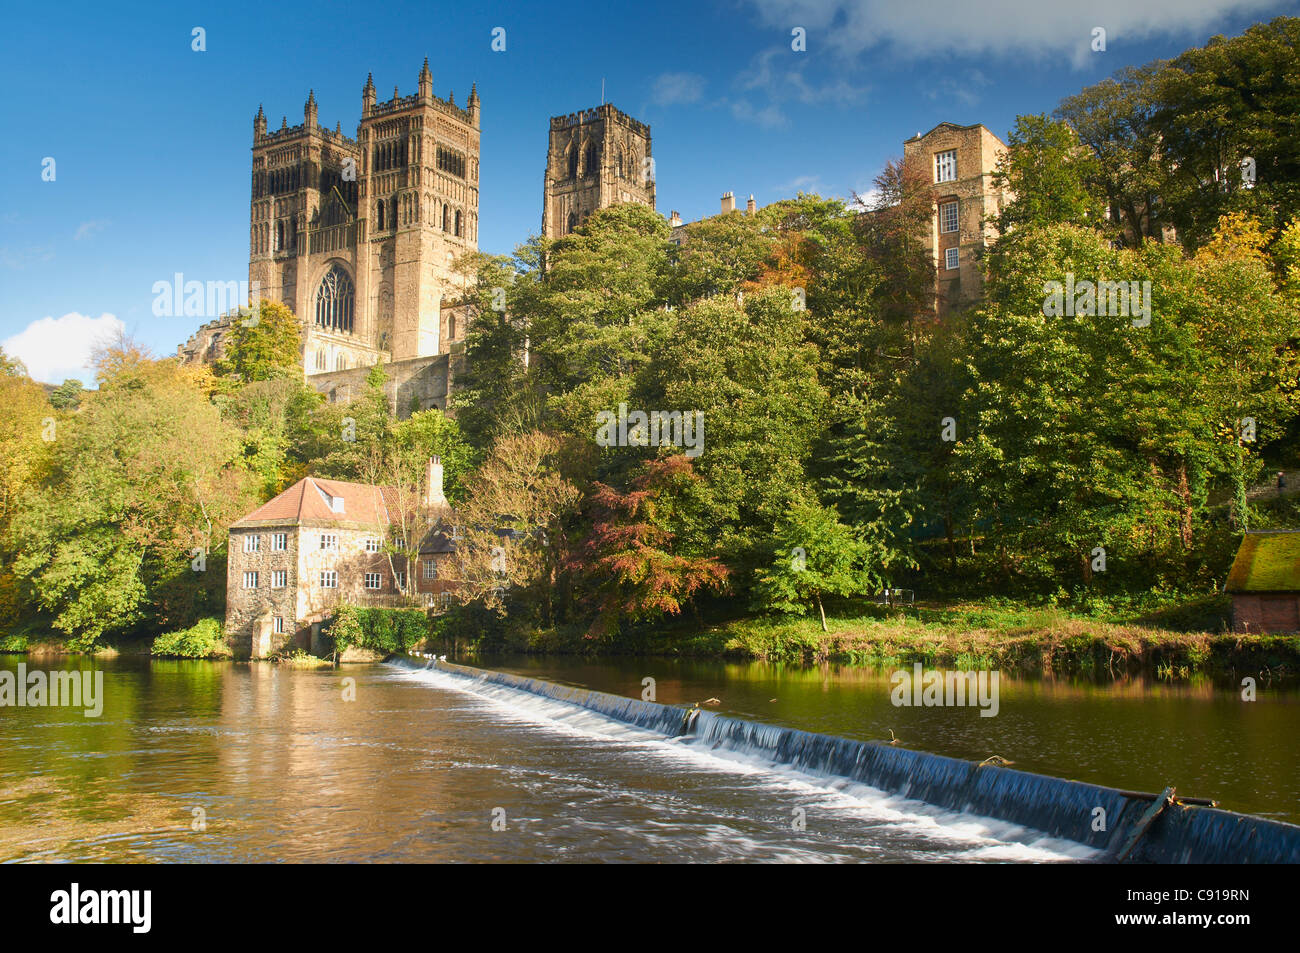 Durham Cathedral dominates the city of Durham. The tall towers of the Norman cathedral can be seen from all around the city. Stock Photo